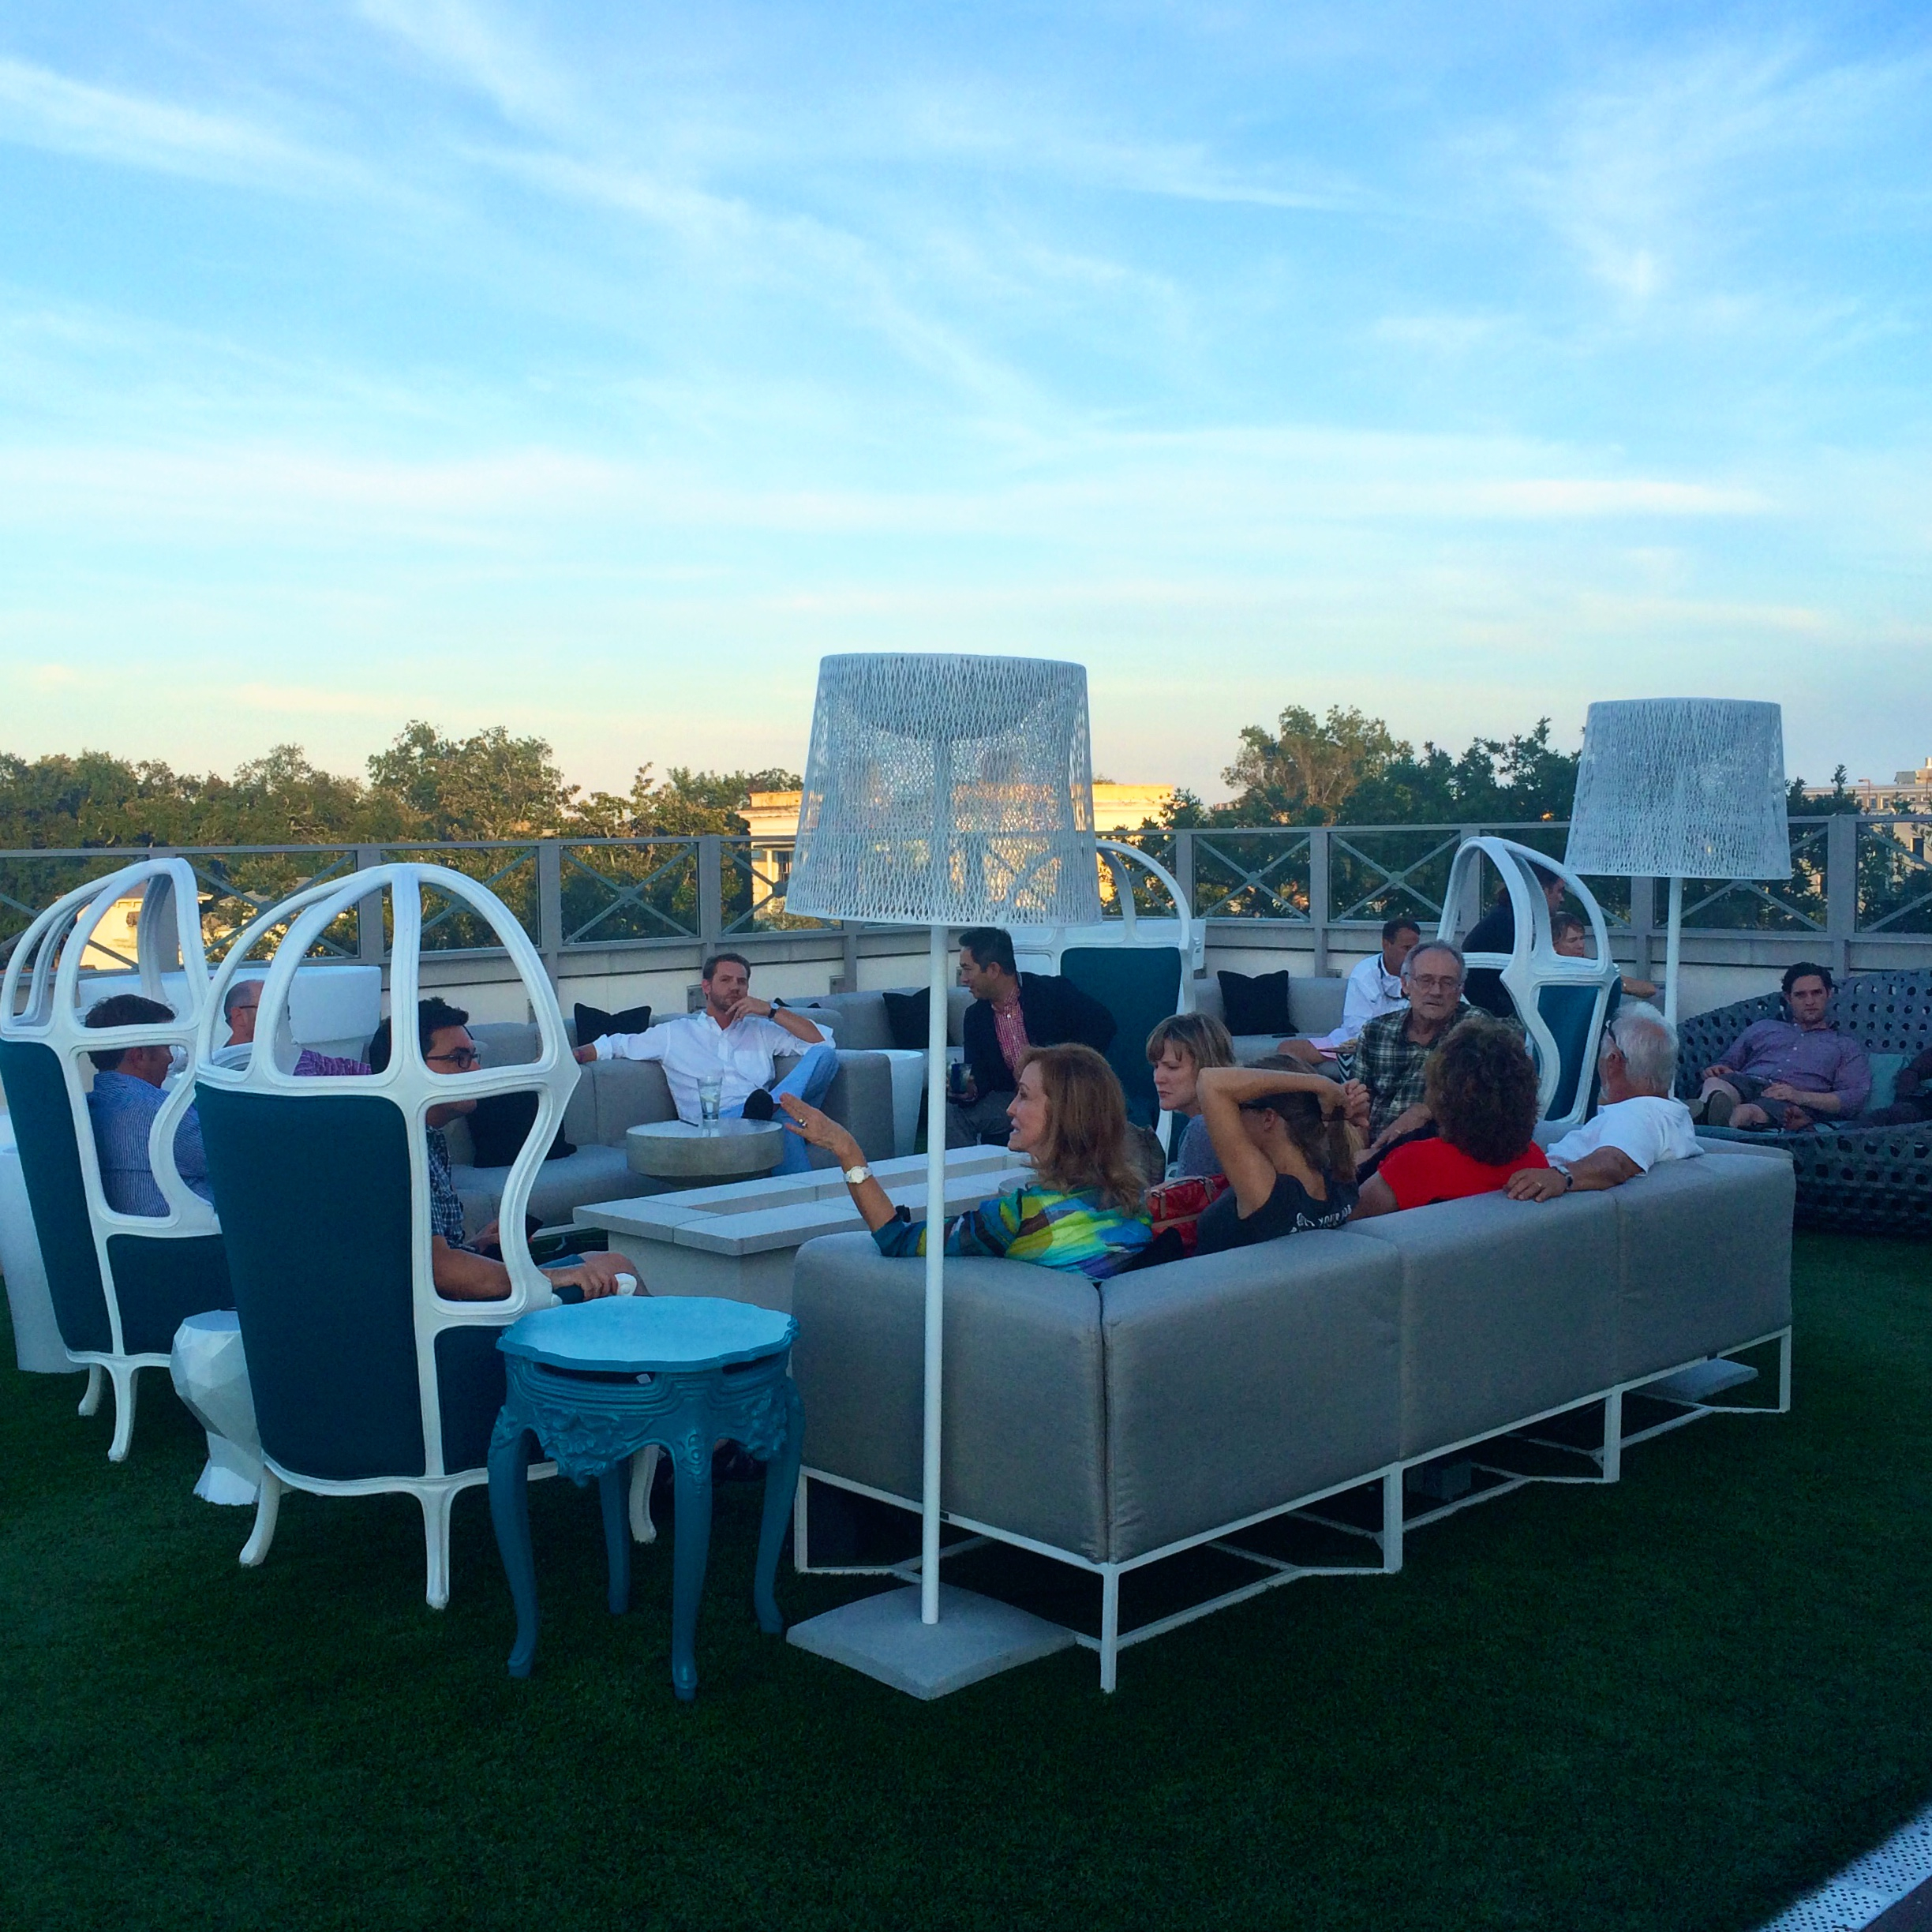 The Rooftop Bar at Elevé with comfy seating and great views